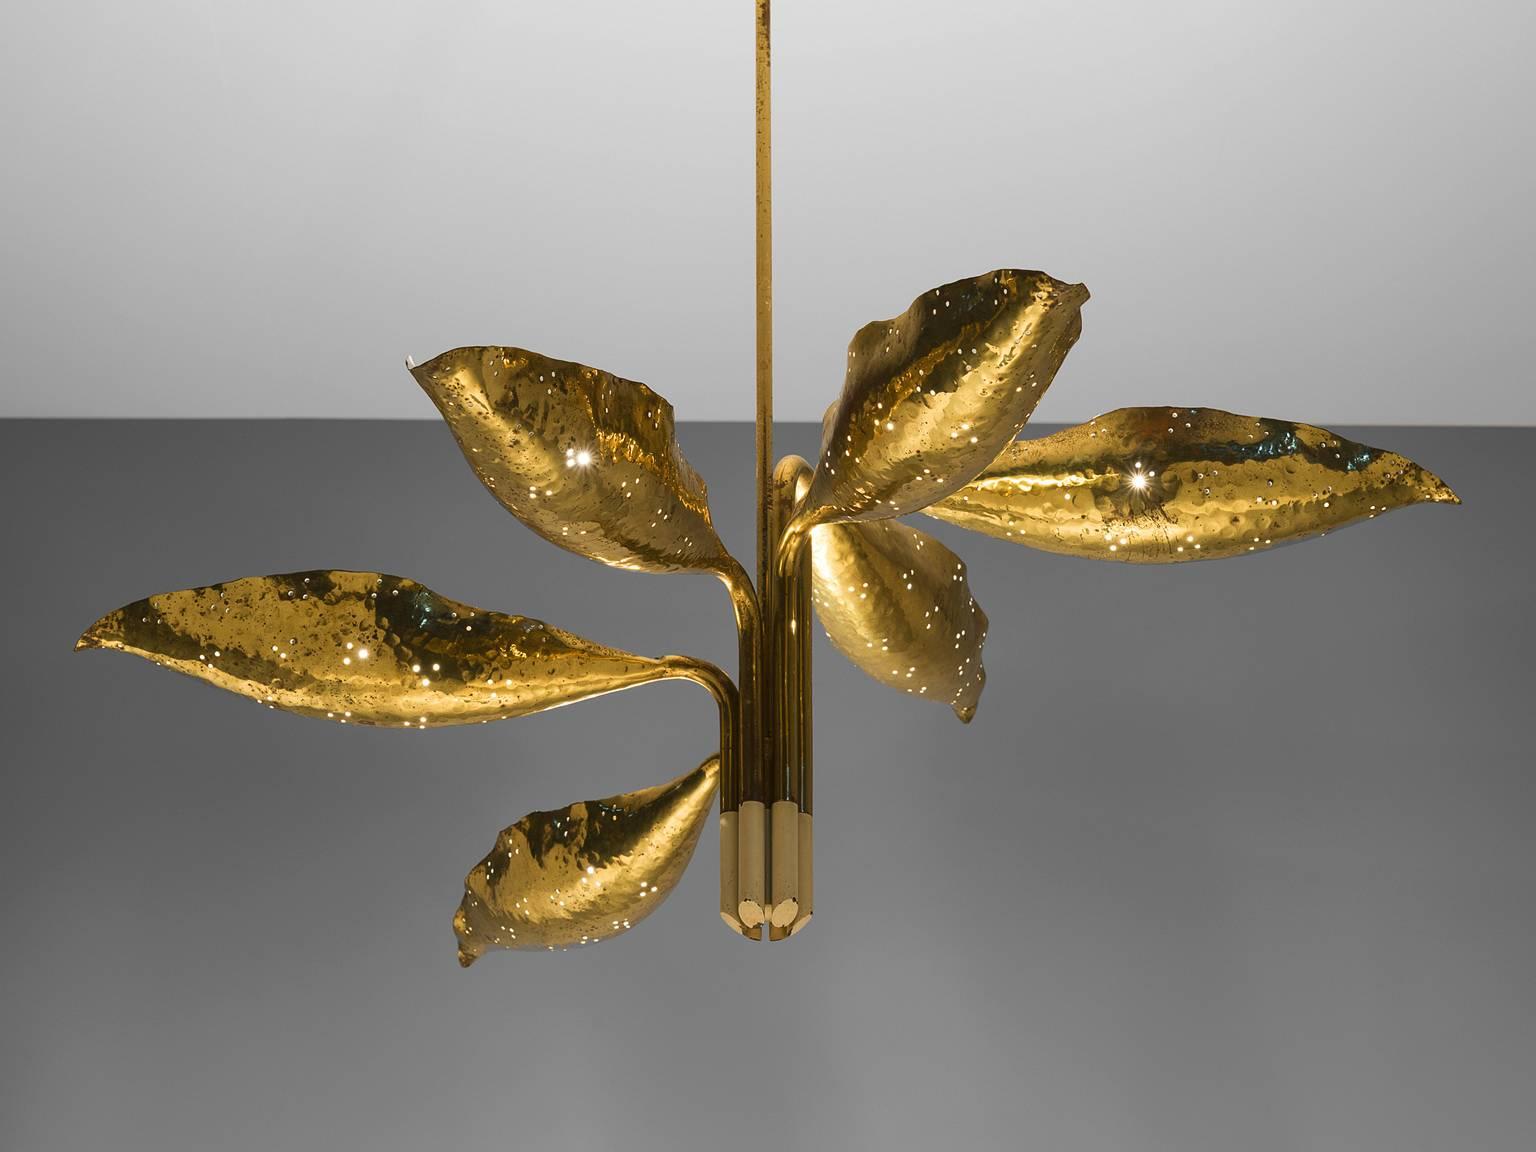 Chandelier, brass by Angelo Lelii for Arredoluce, Italy, 1950s.

This elegant and organic pendant with admirable patinated brass hand-hammered leafs is designed by Angelo Lelli and part of the midcentury design collection by Morentz. The chandelier